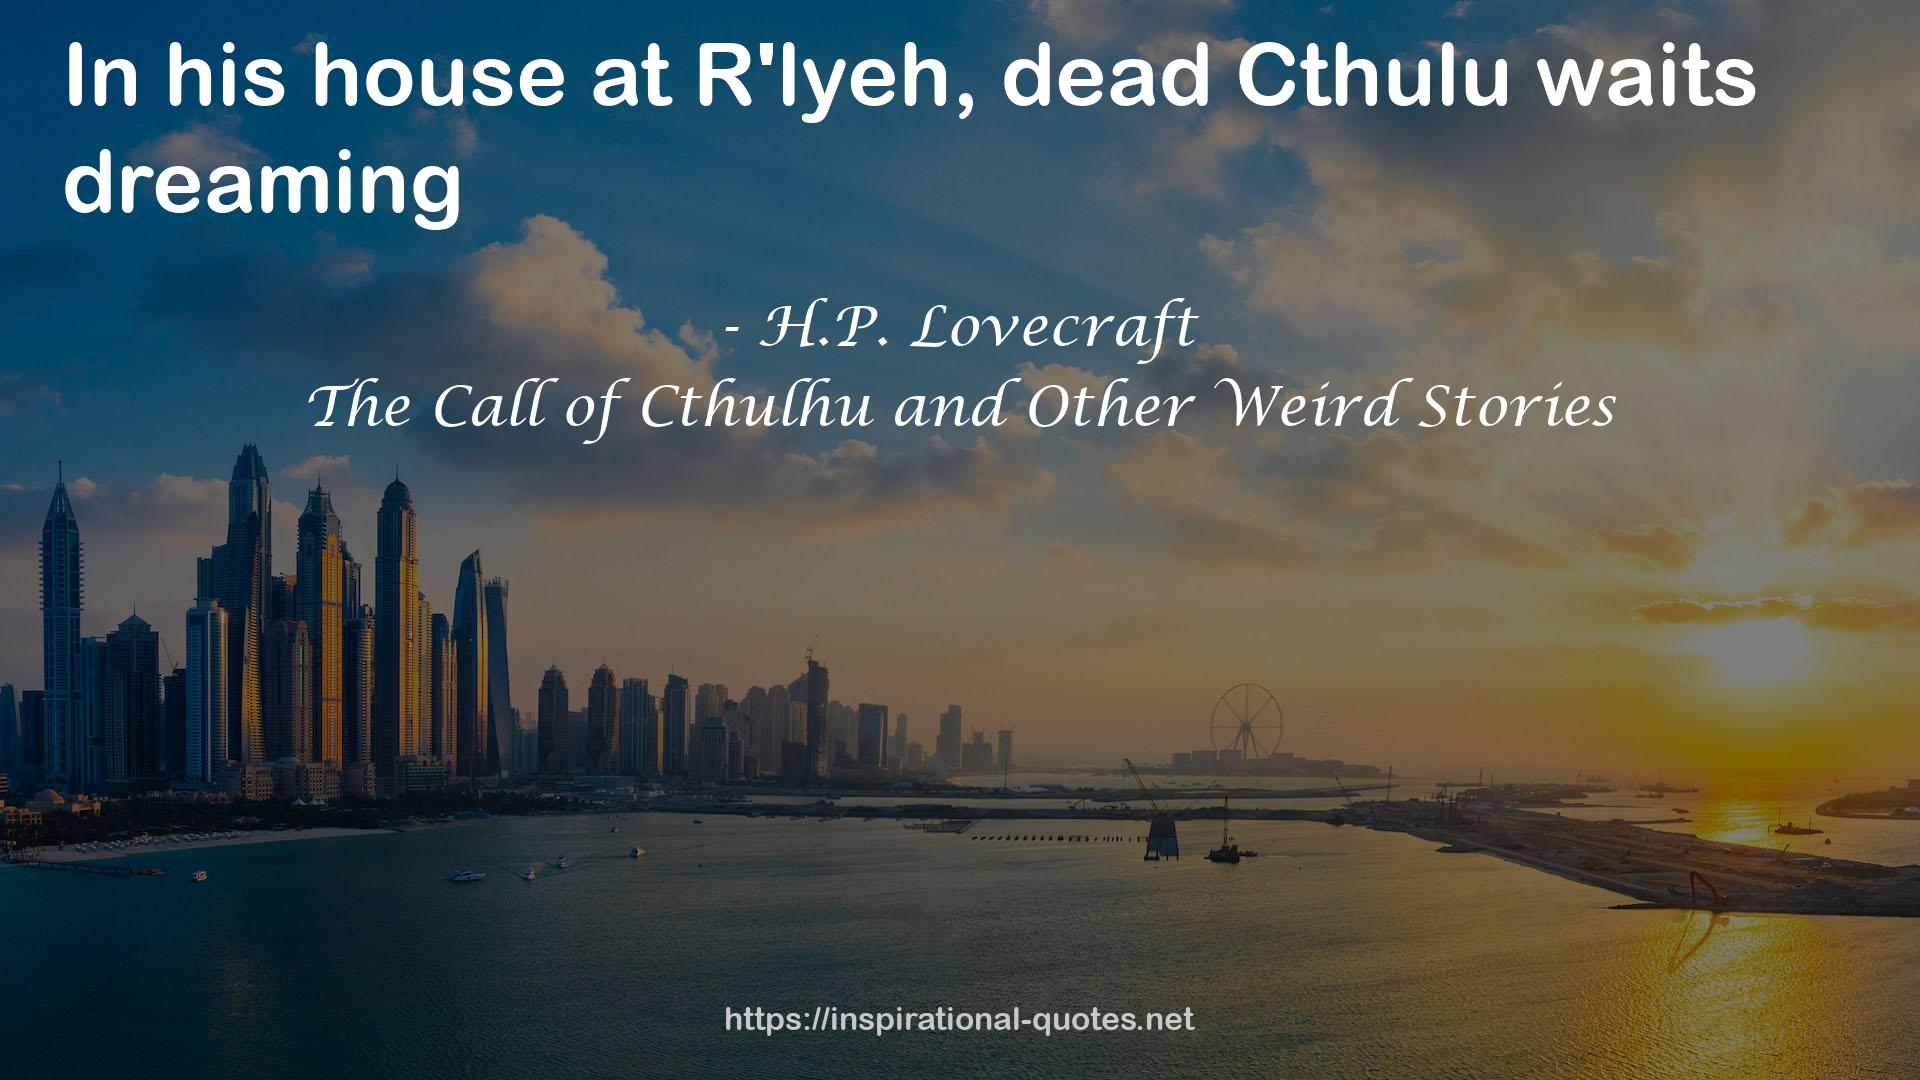 The Call of Cthulhu and Other Weird Stories QUOTES